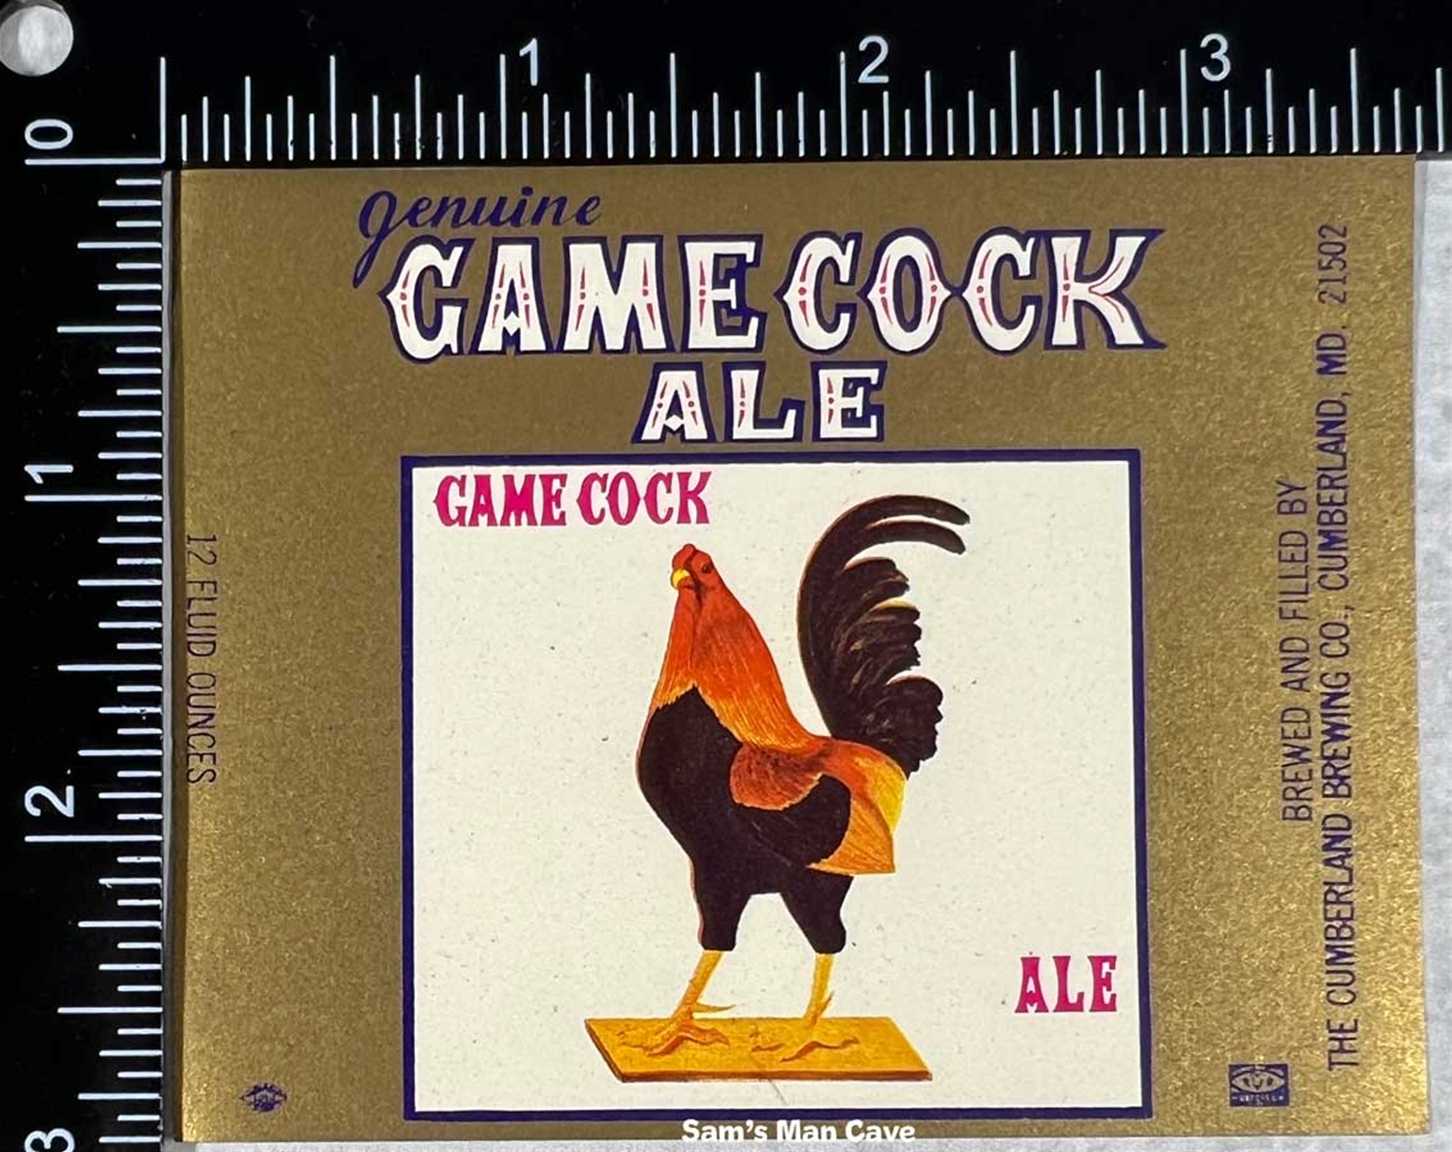 Gamecock Ale Beer Label